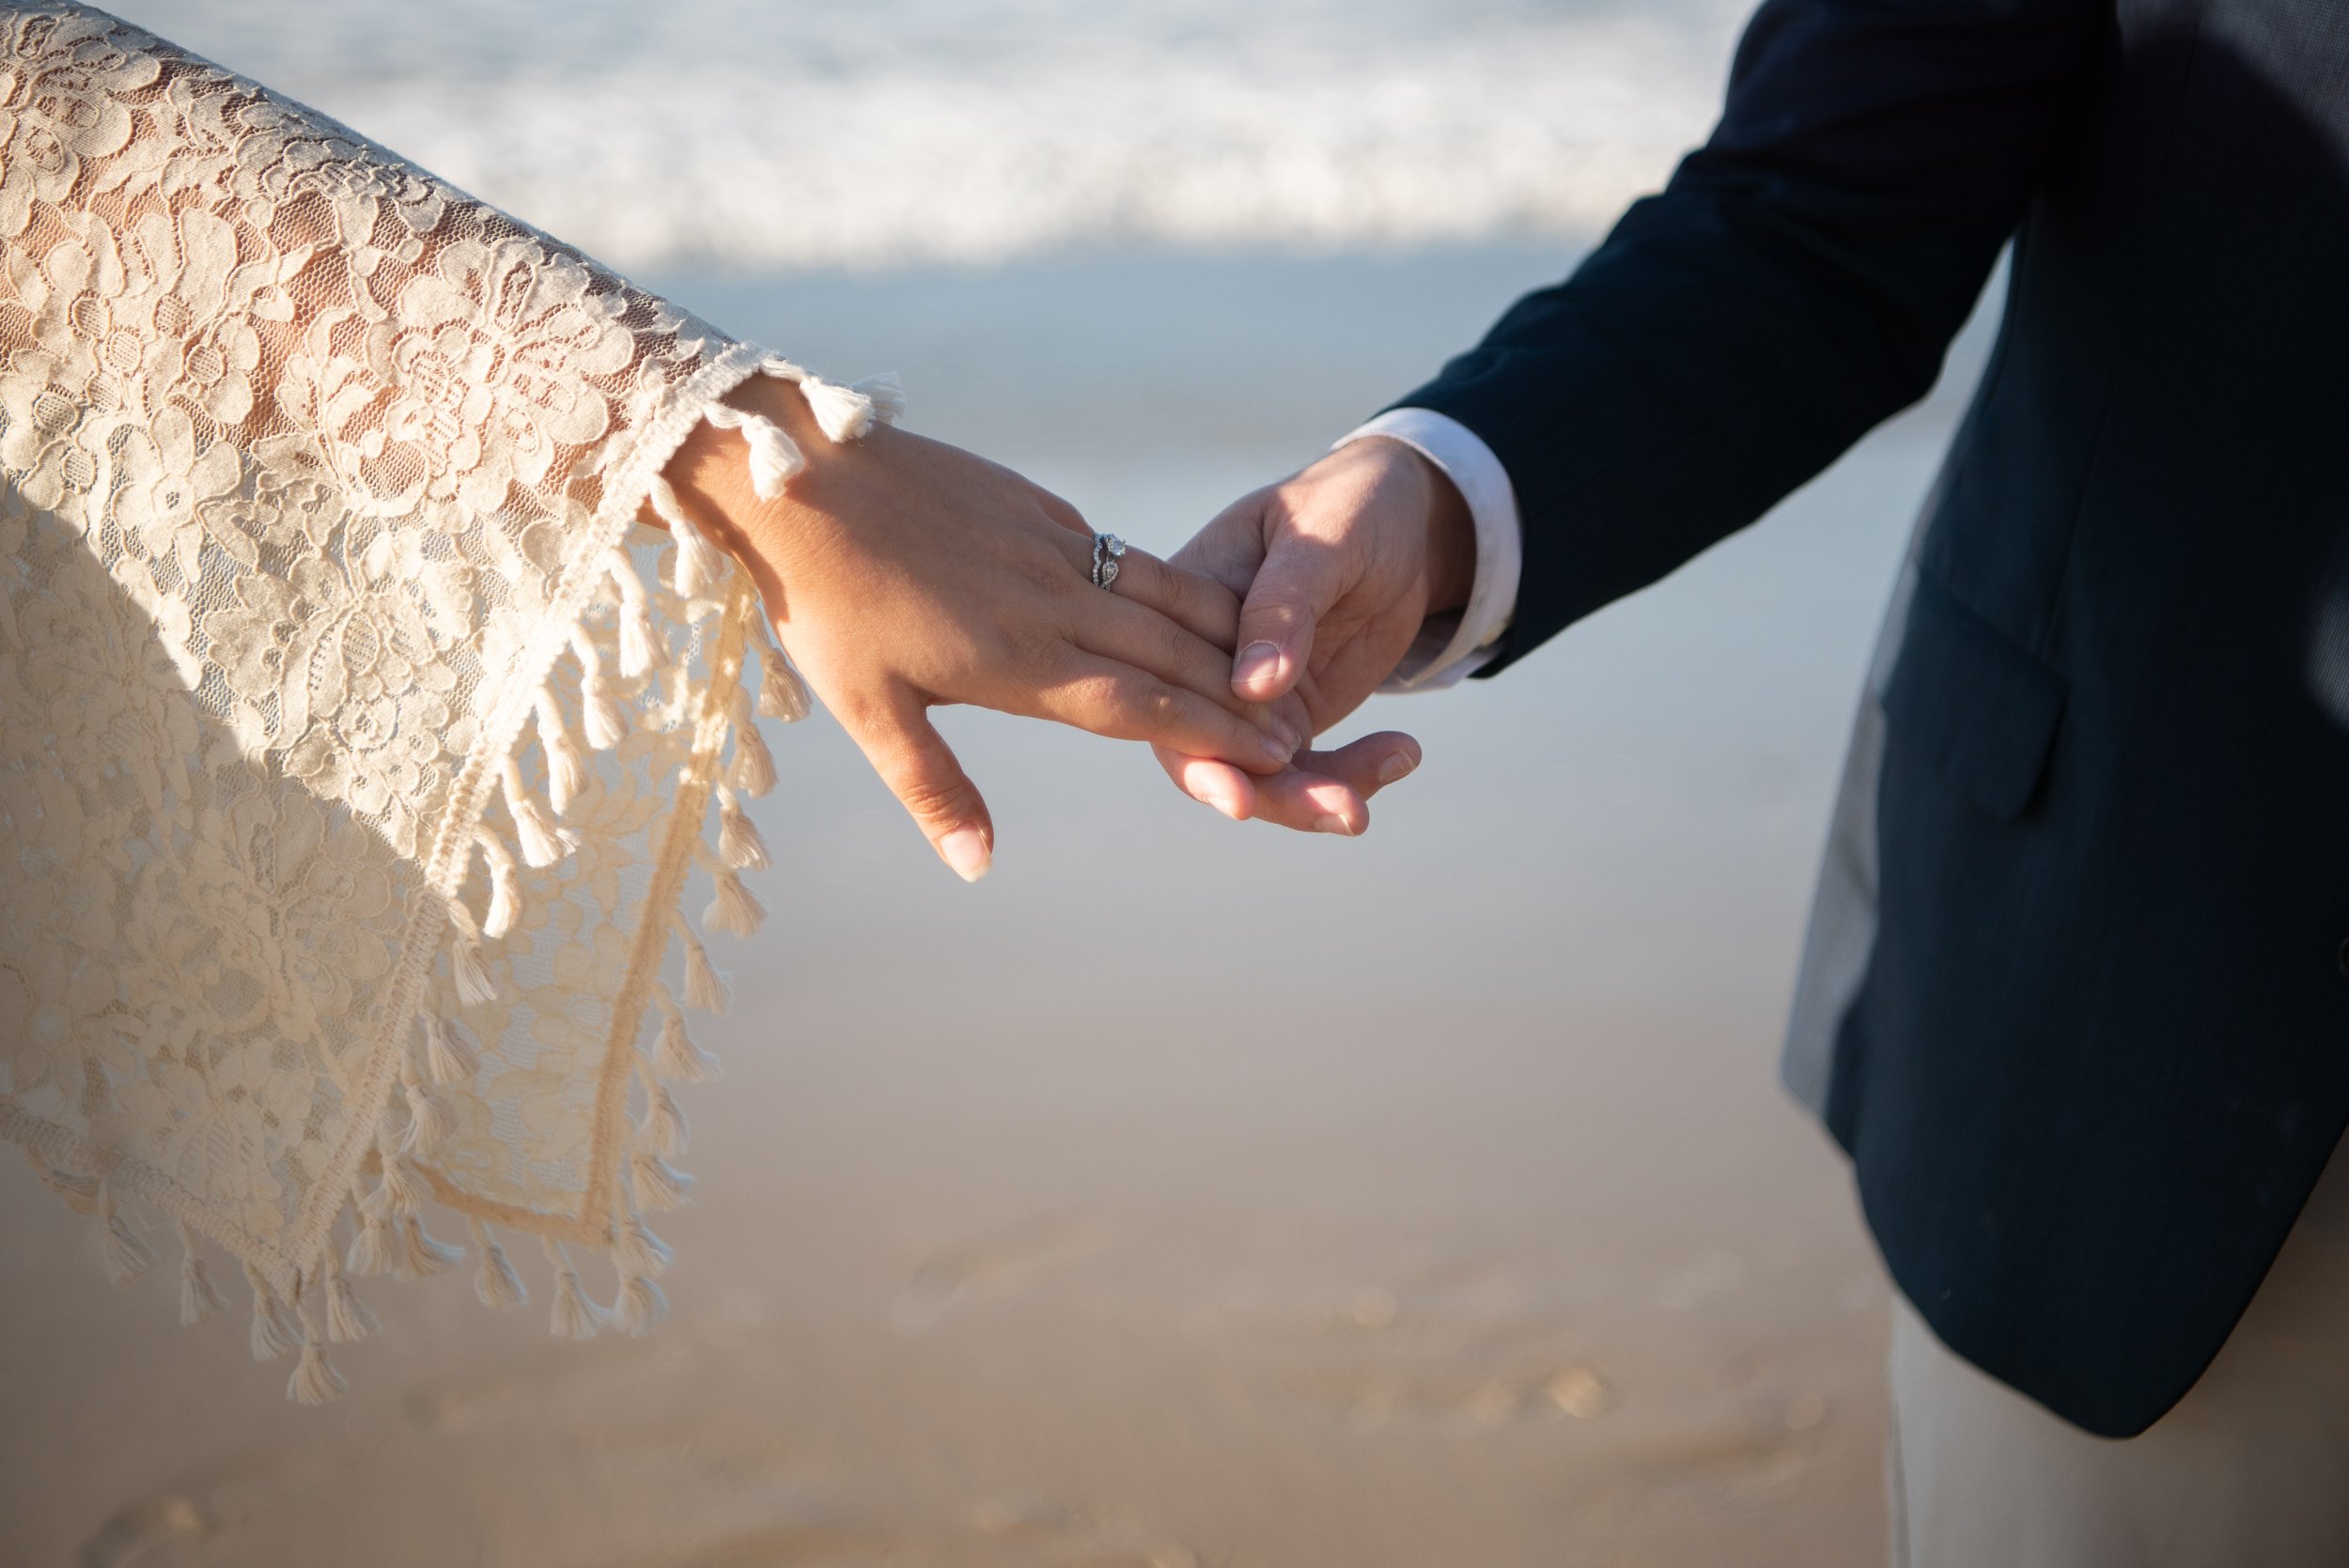 If a peaceful wedding day is what you crave, elopement just might be the way to go. Check out these 5 reasons couples elope.